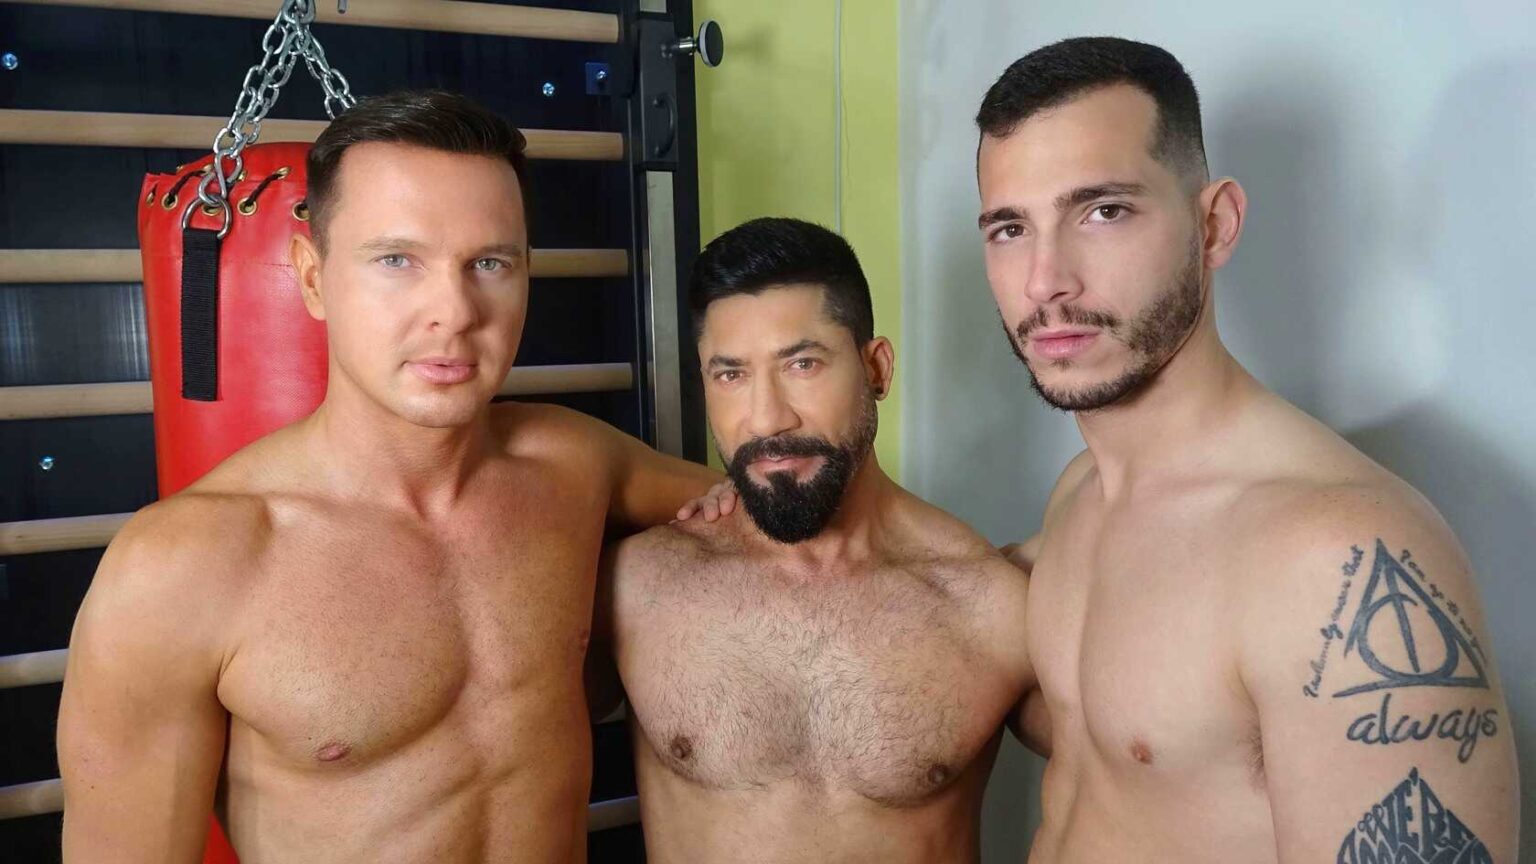 andre cruise, sultan rhodos and ricky hard gay porn actors